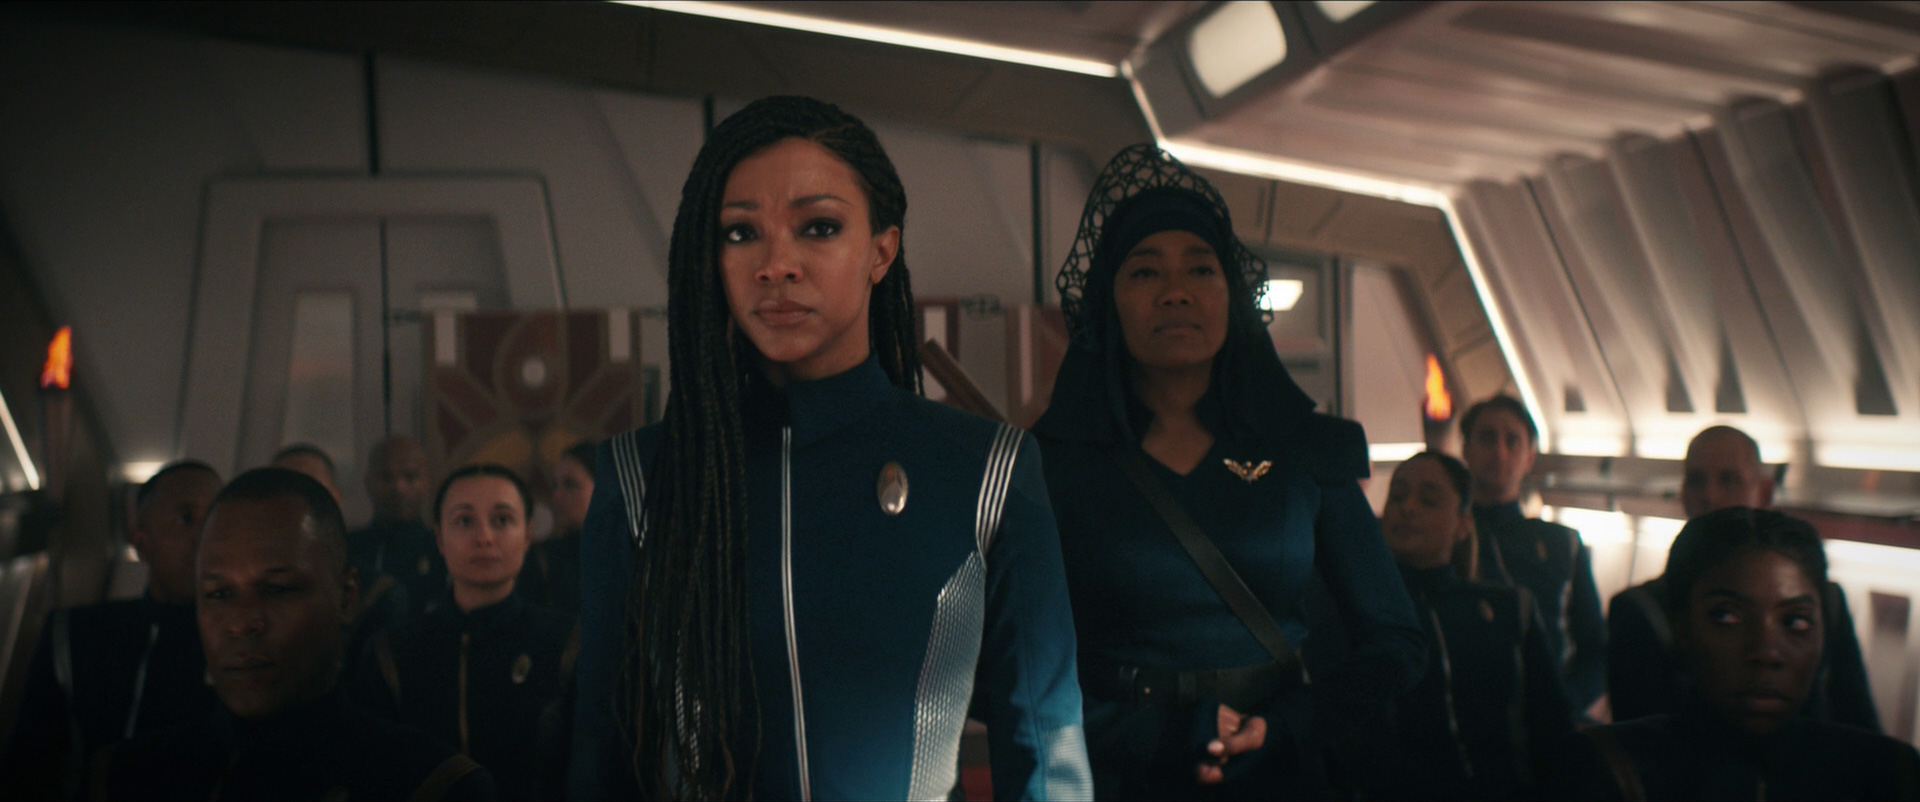 Michael Burnham and her mother Gabrielle in the Star Trek: Discovery episode "Unification III"